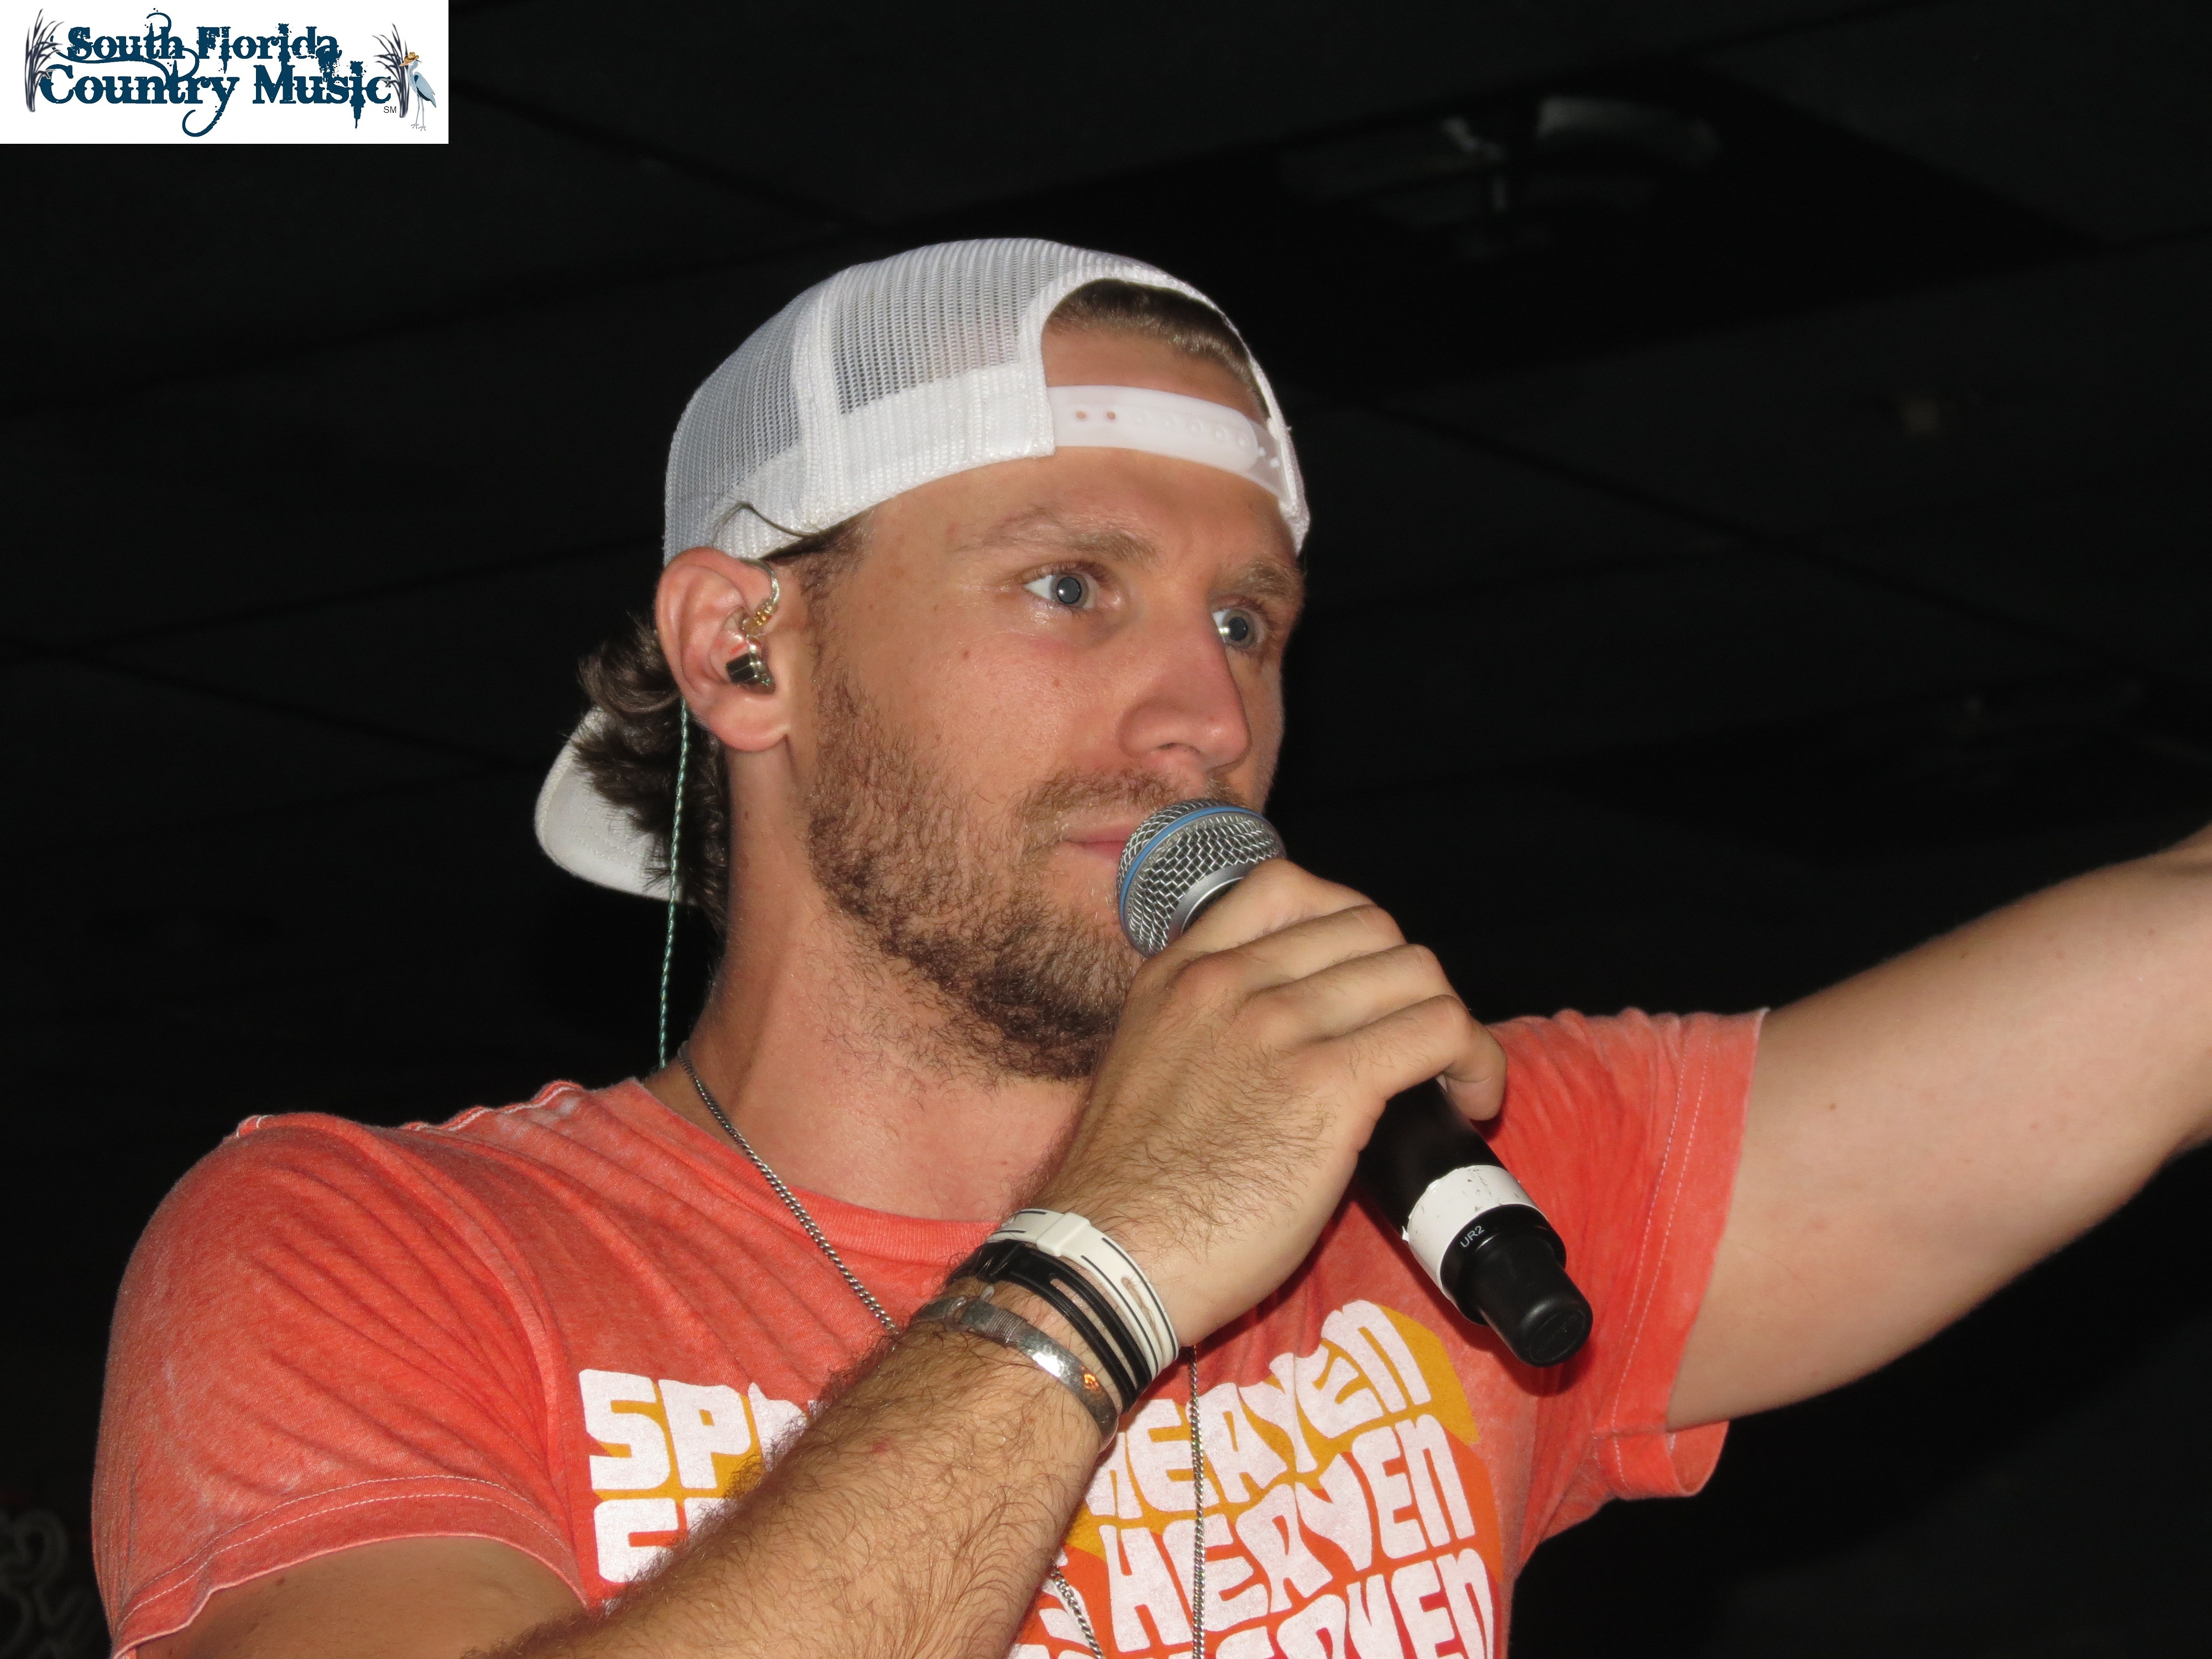 Chase Rice, Read Southall Band - St. Petersburg